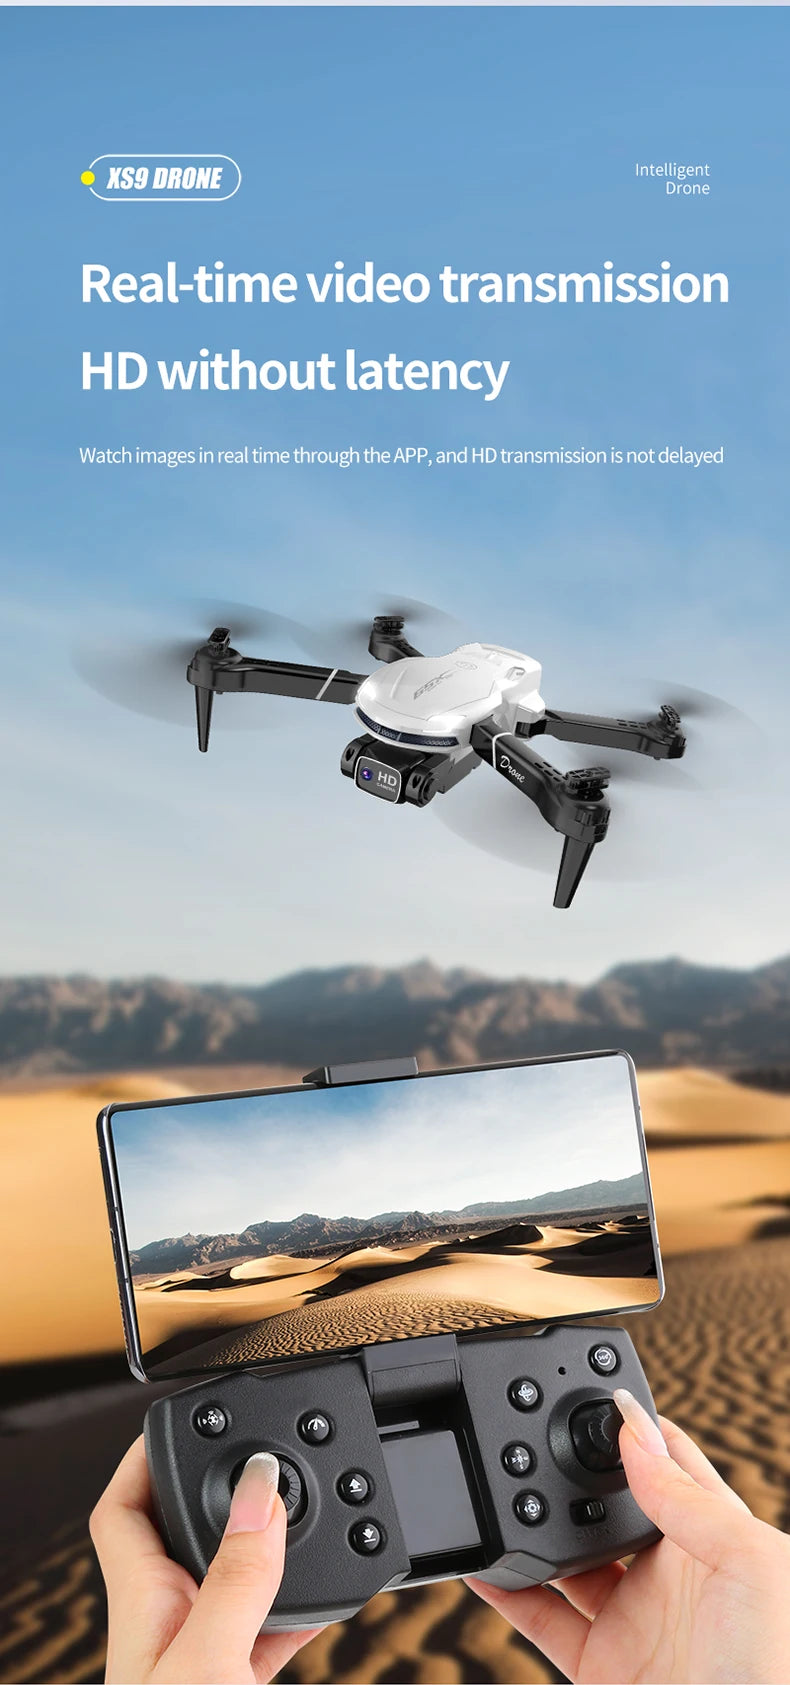 XS9 Drone, XS9 DRONE Intelligent Drone Real-time video transmission HDwithout latency